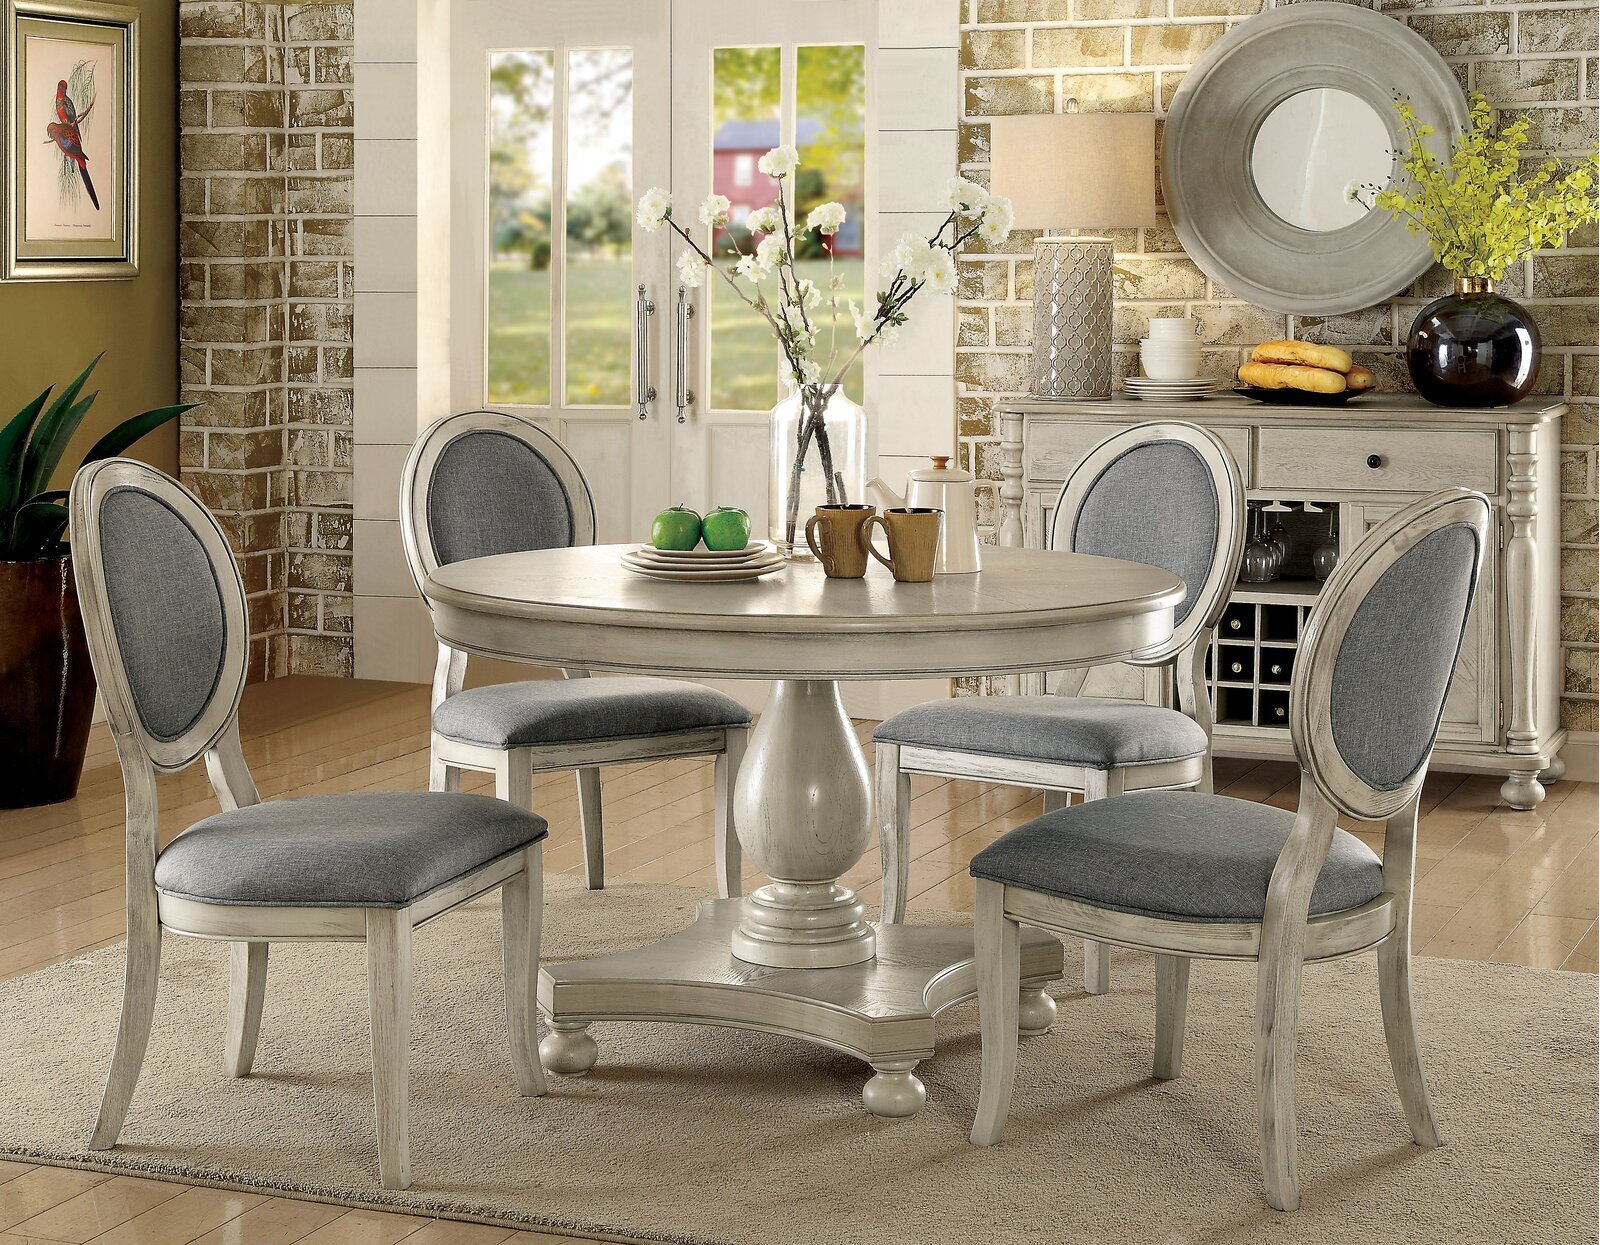 Four Seater Round Table